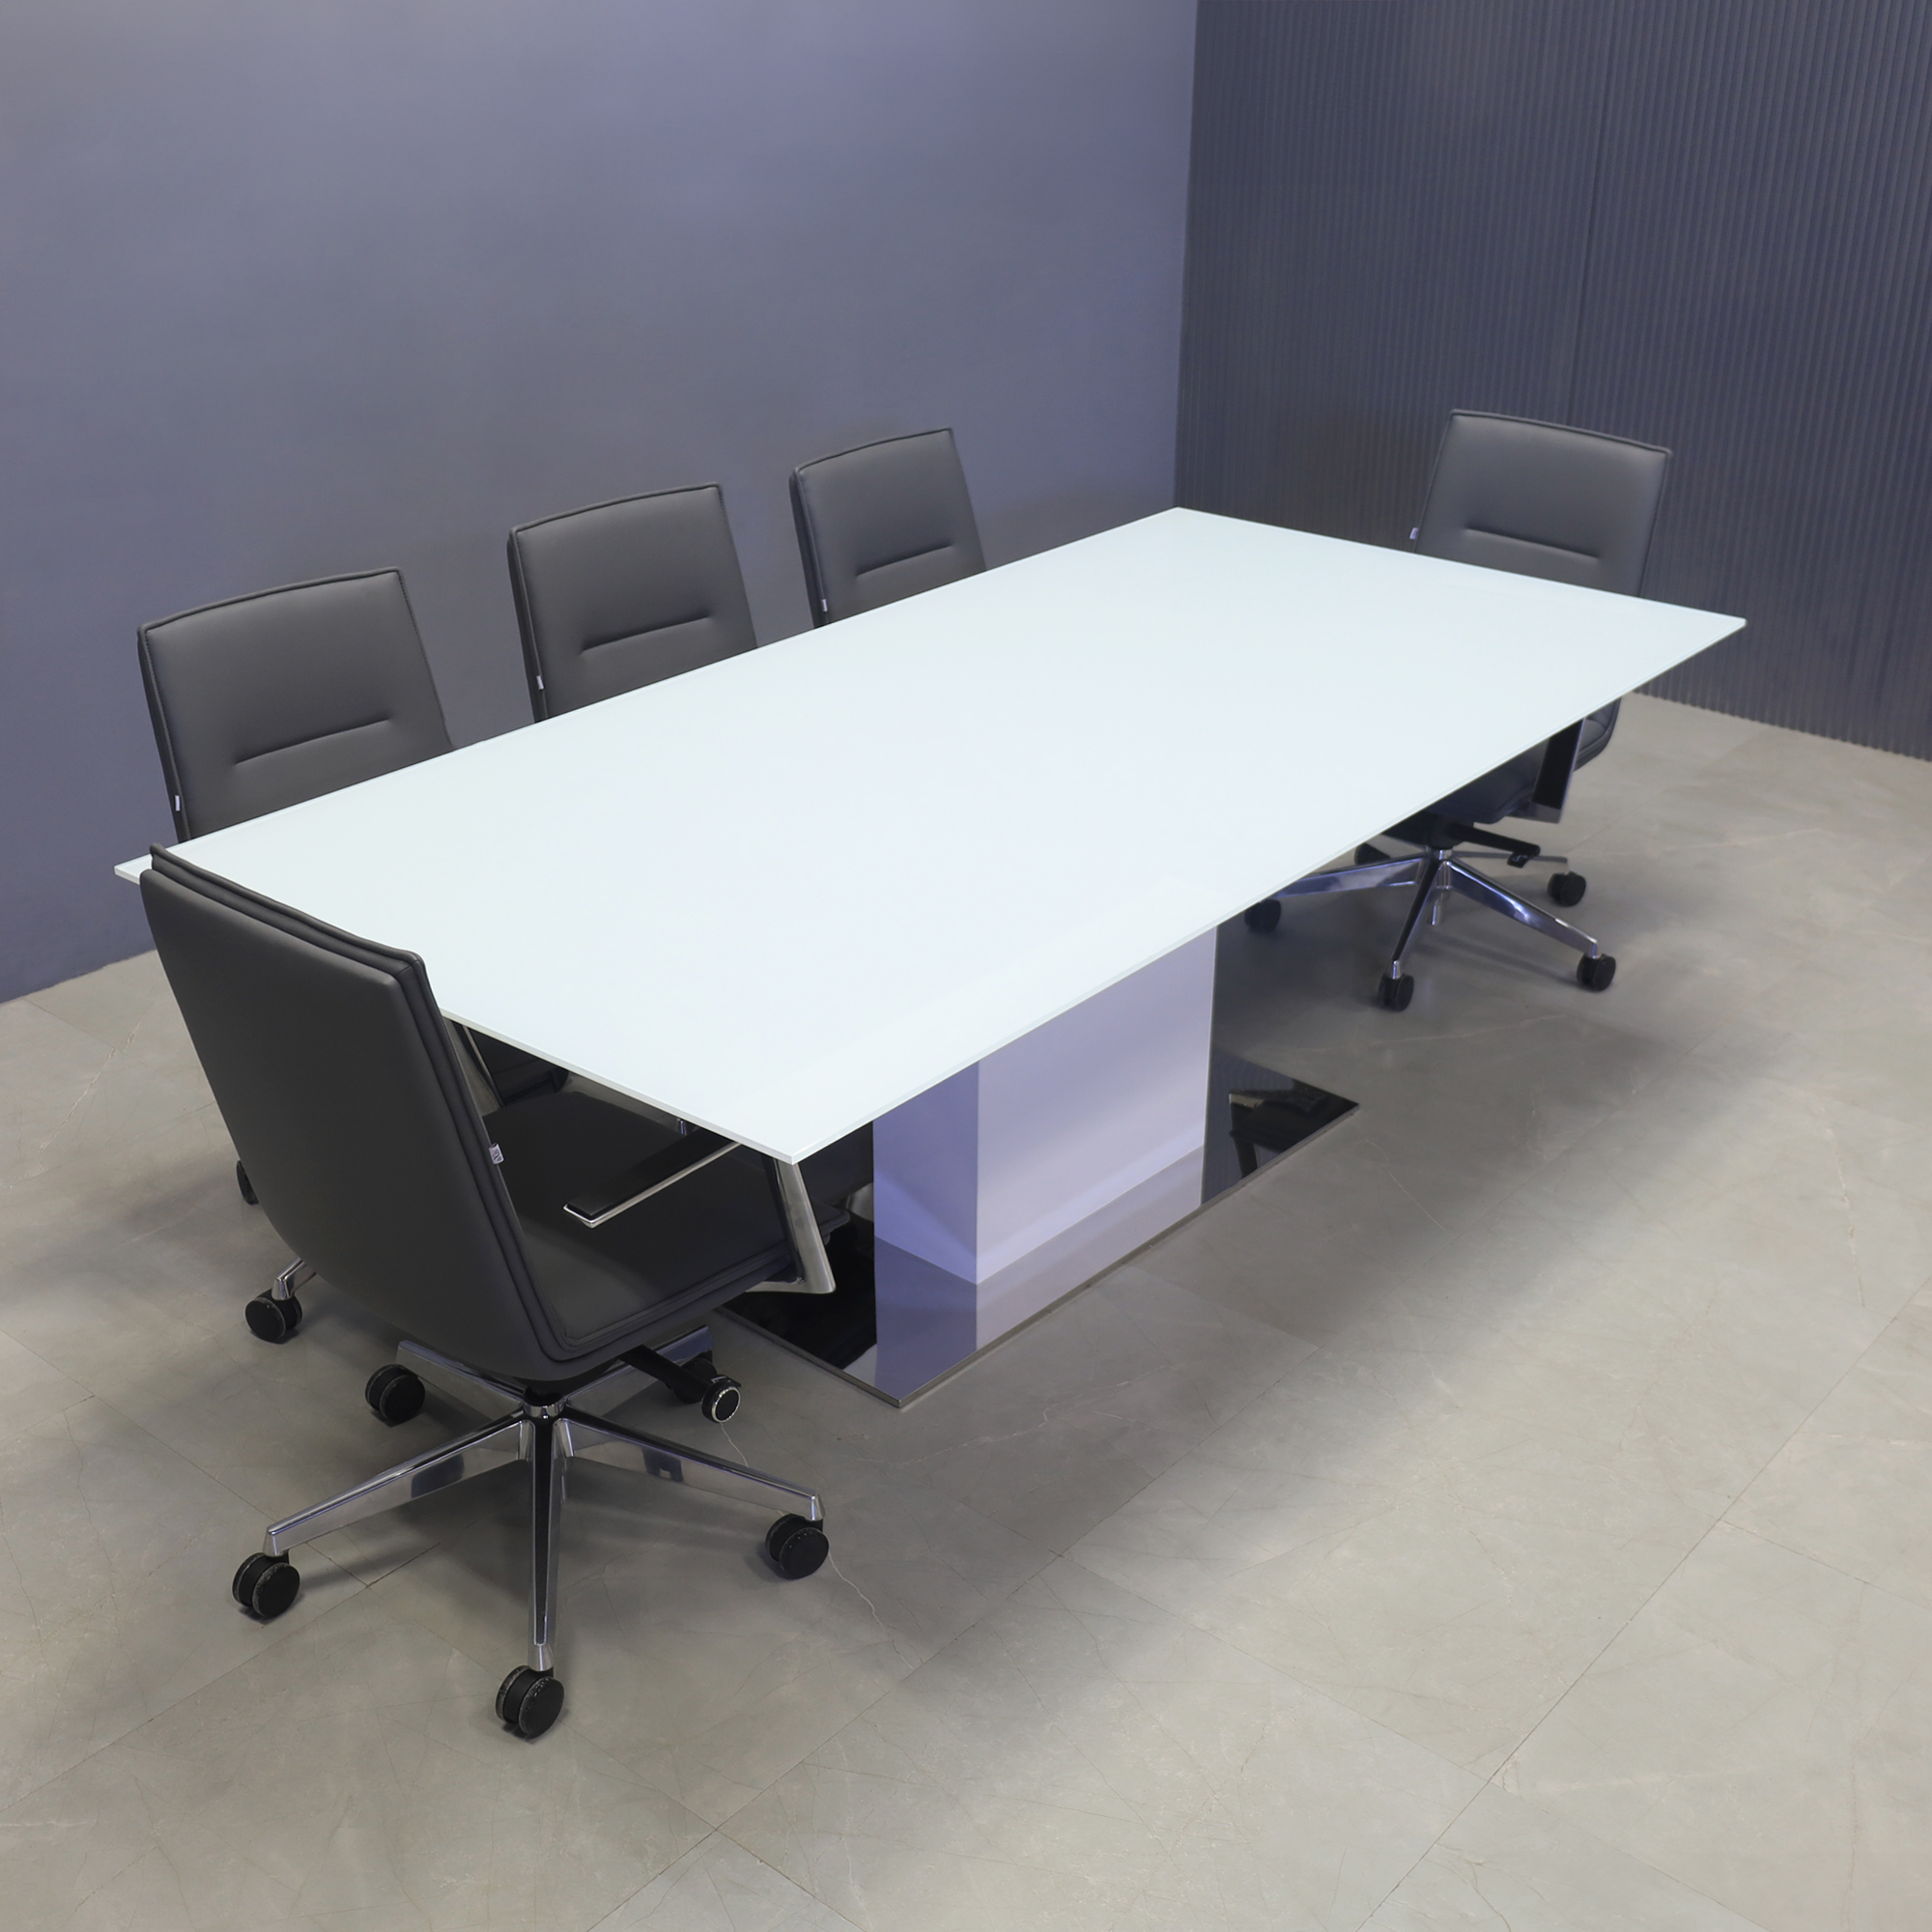 90-inch Omaha Rectangular Conference Table in 1/2